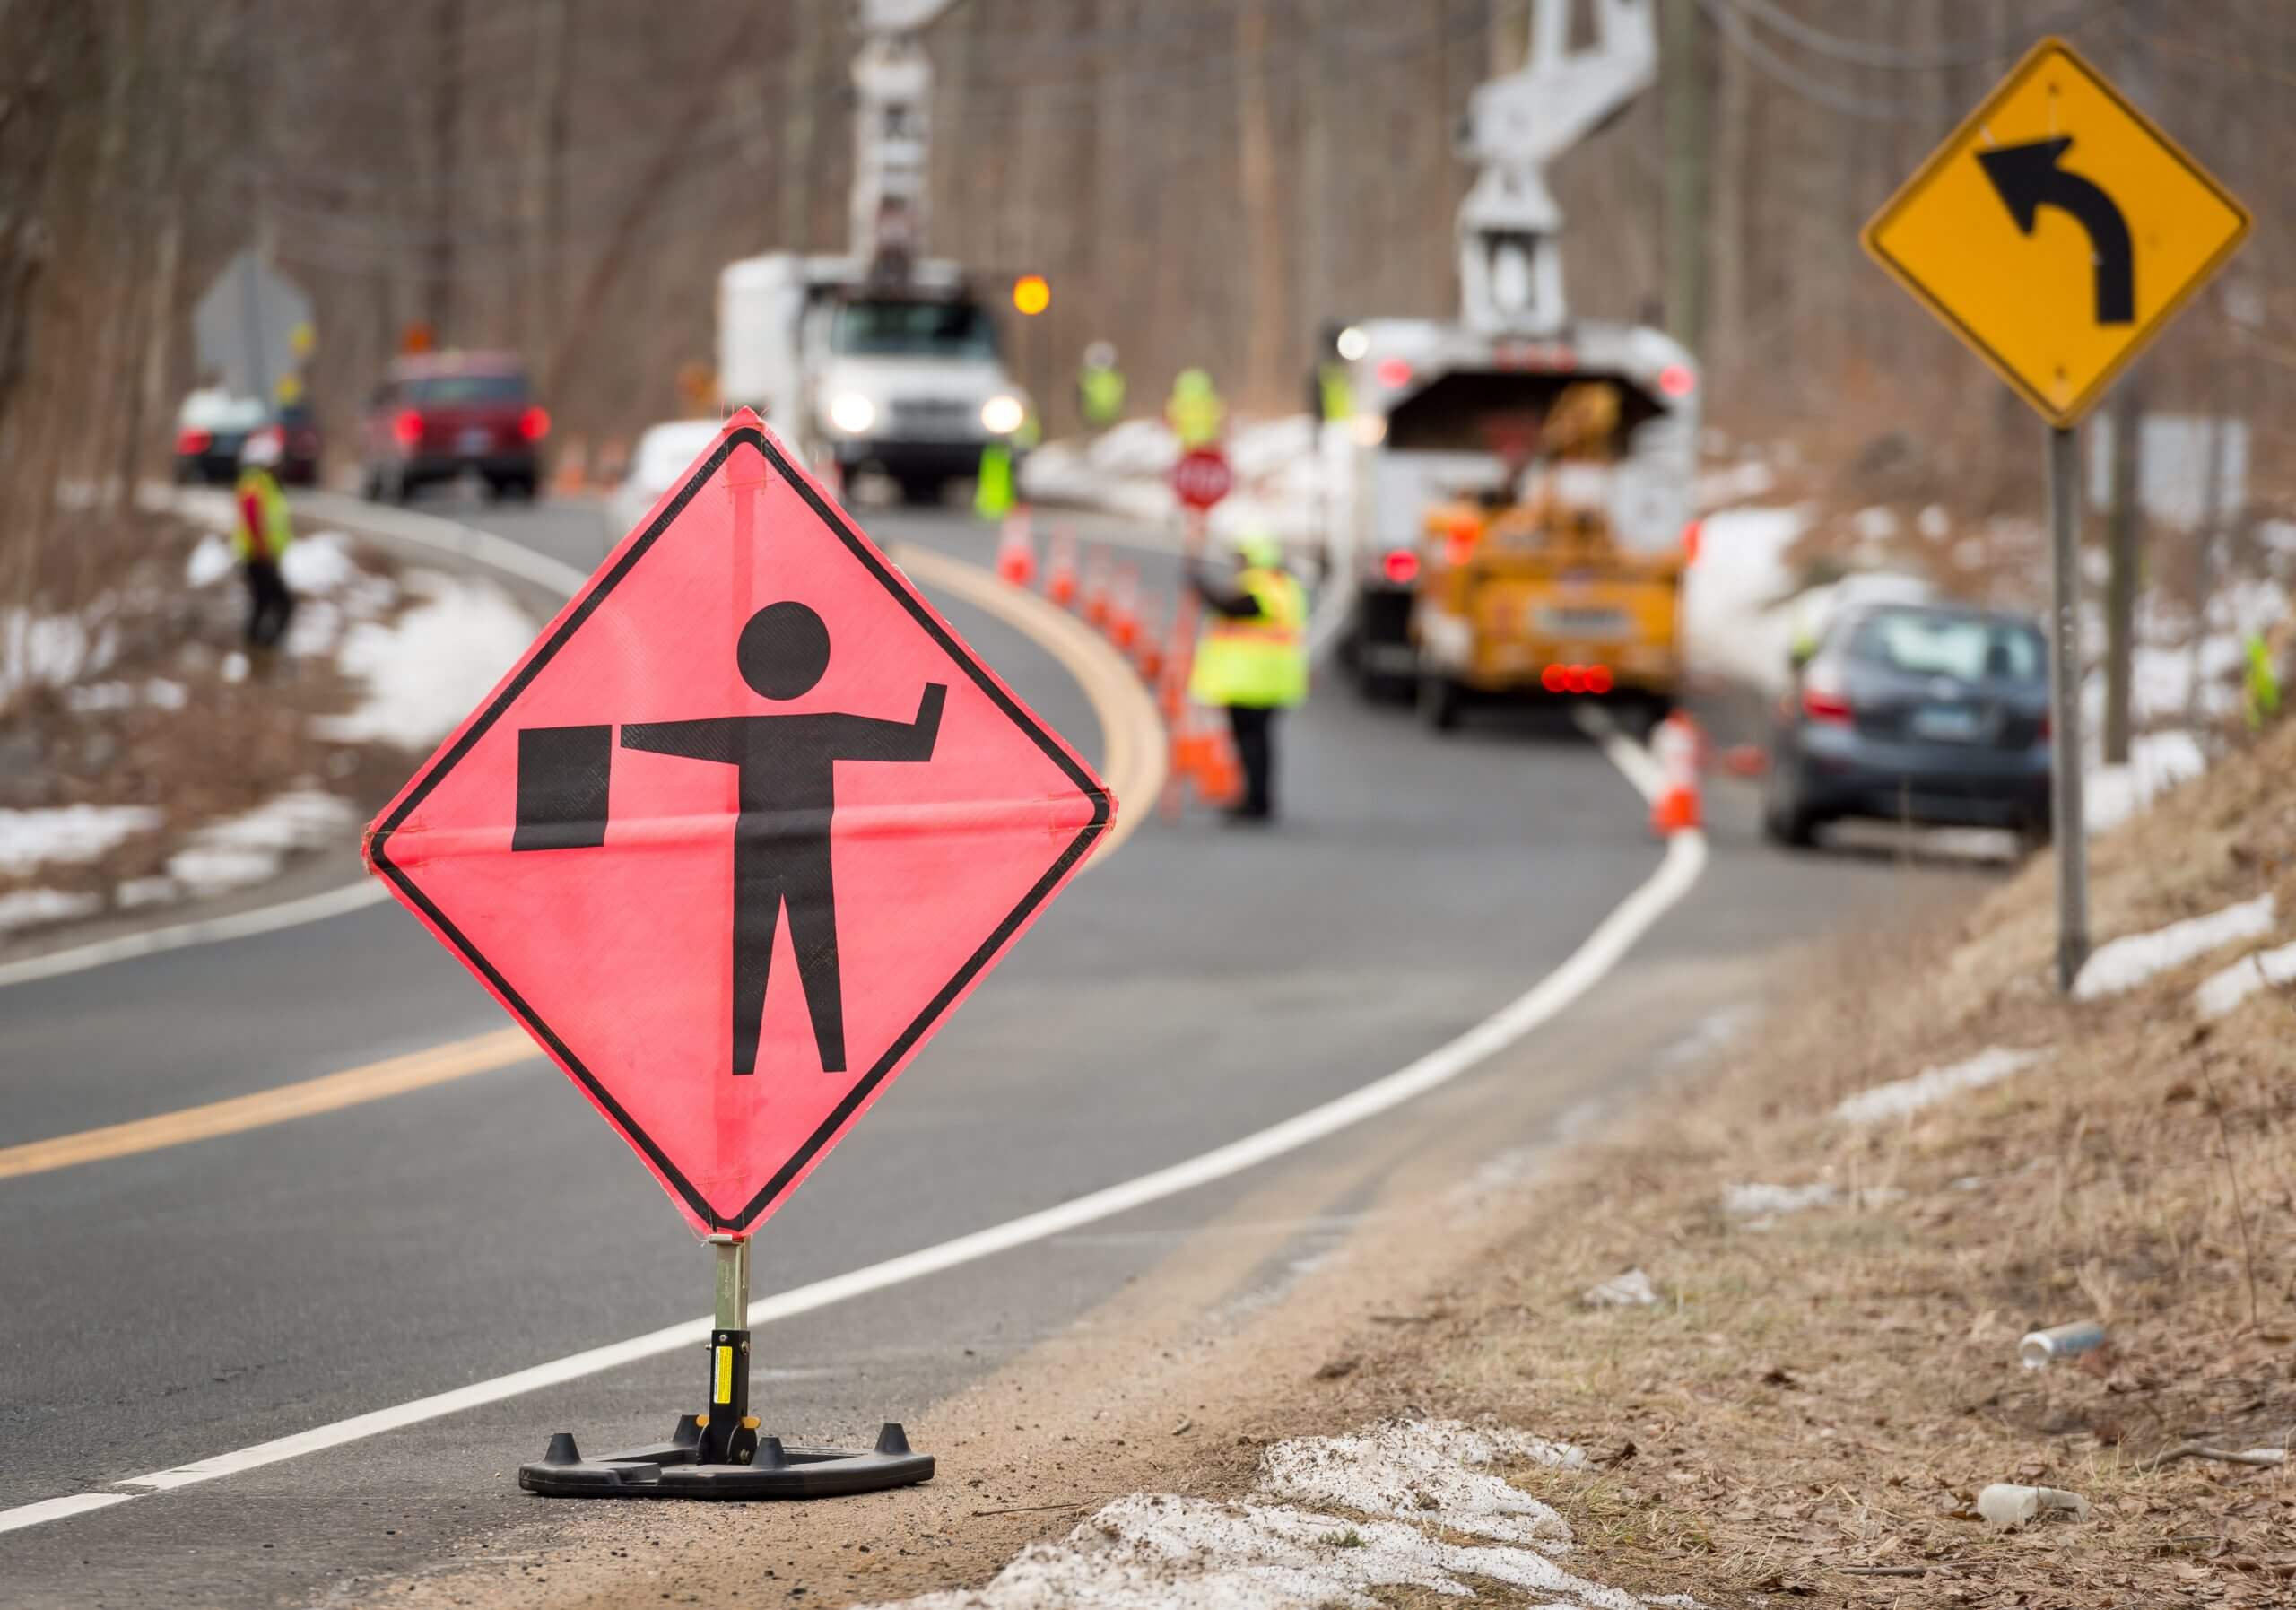 A focused view of a flagger ahead sign is shown on the side of the road. Behind the sign is an unfocused view of a traffic flagger, traffic cones, and two lift trucks.